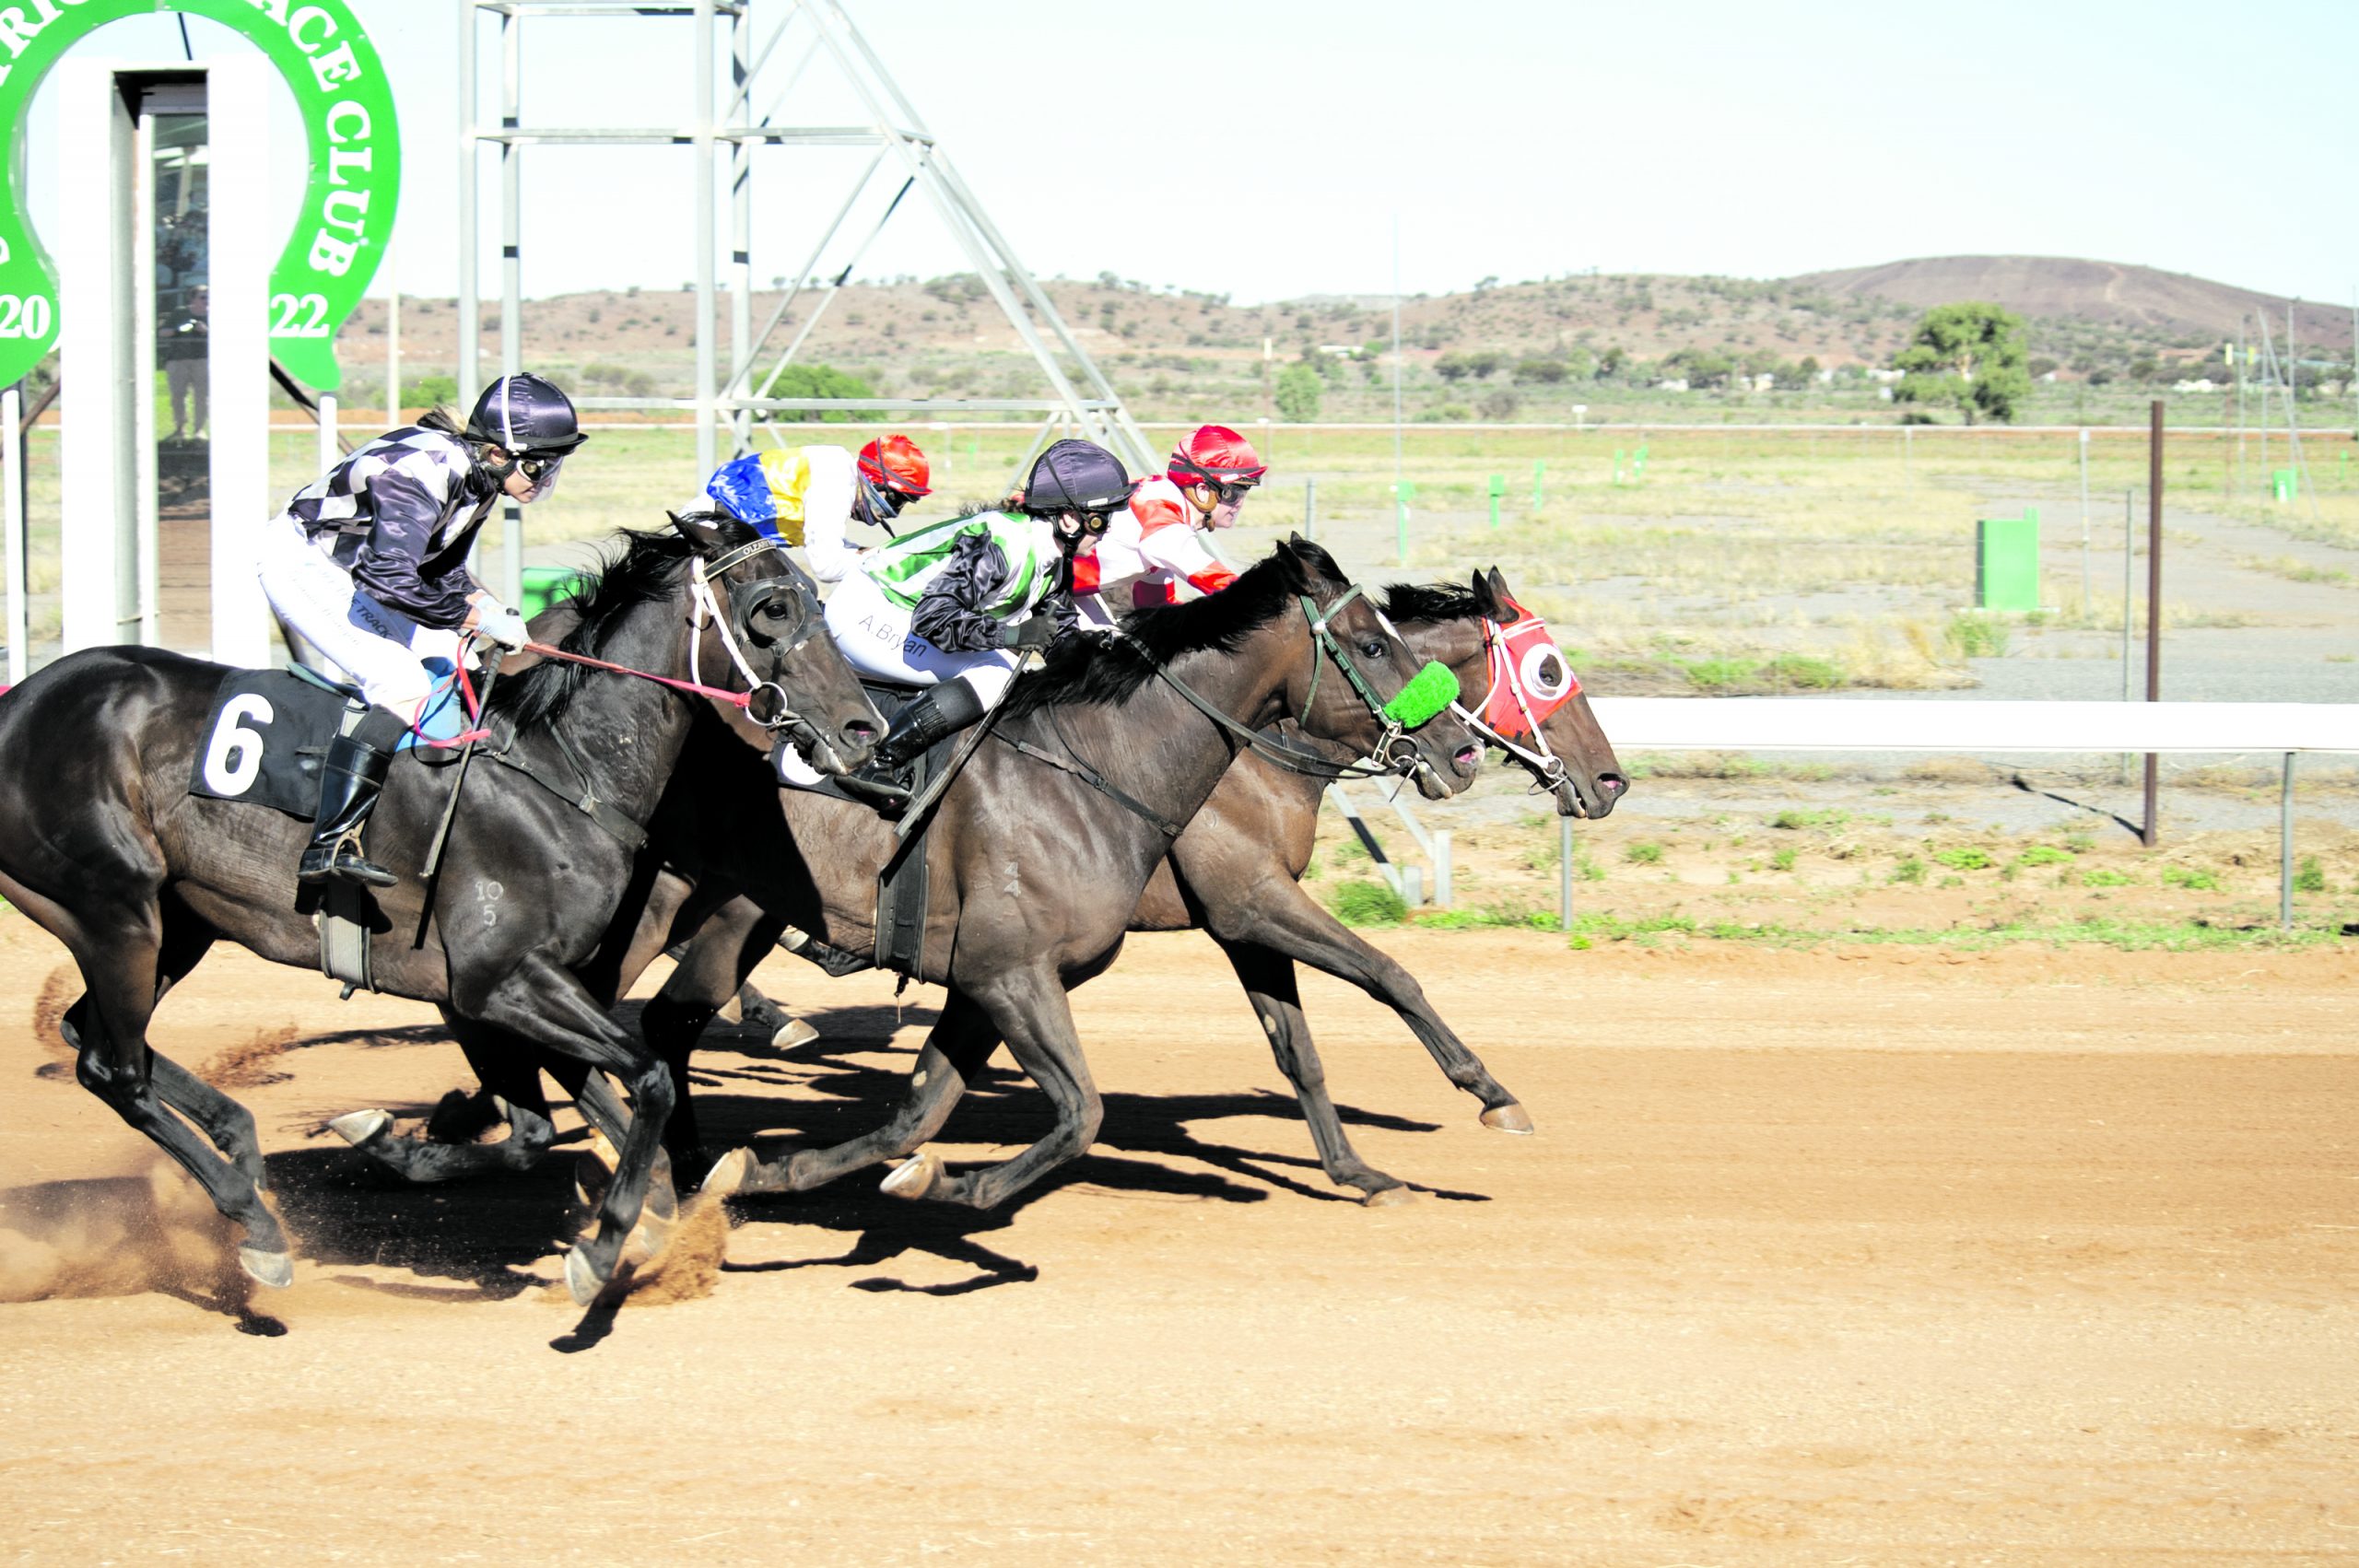 In one of the closest Outback Cup finishes in recent years – Kazoom came home strong to win the day’s major race over the likes of End of Day (8) and Yulong Awesome (6). PICTURE: PATRICK REINCKE